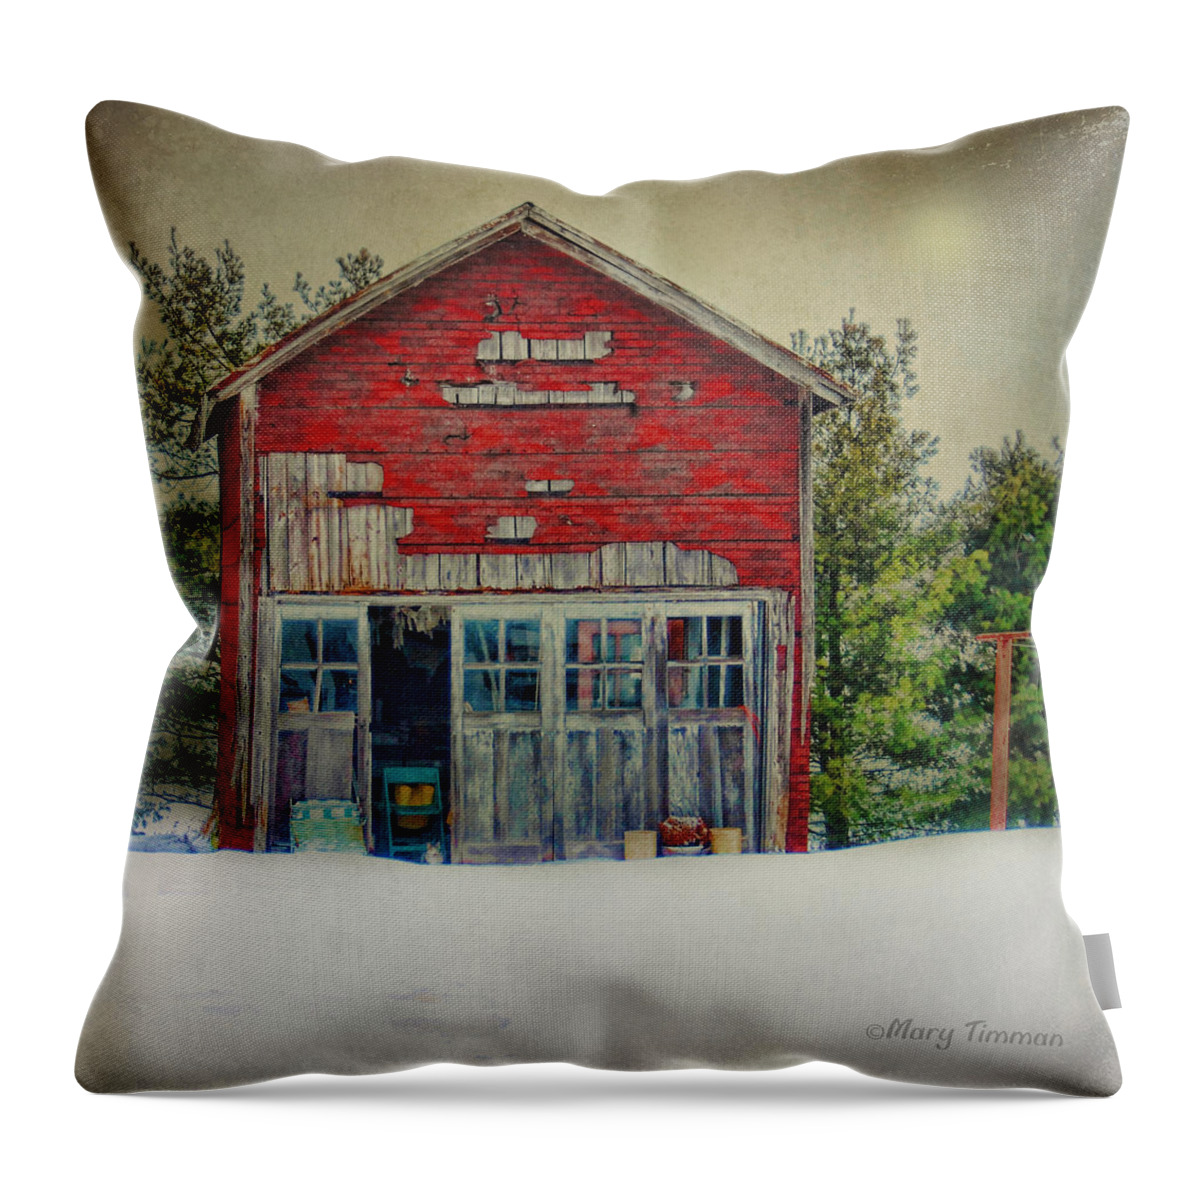 Shed Throw Pillow featuring the photograph Rustic Shed by Mary Timman